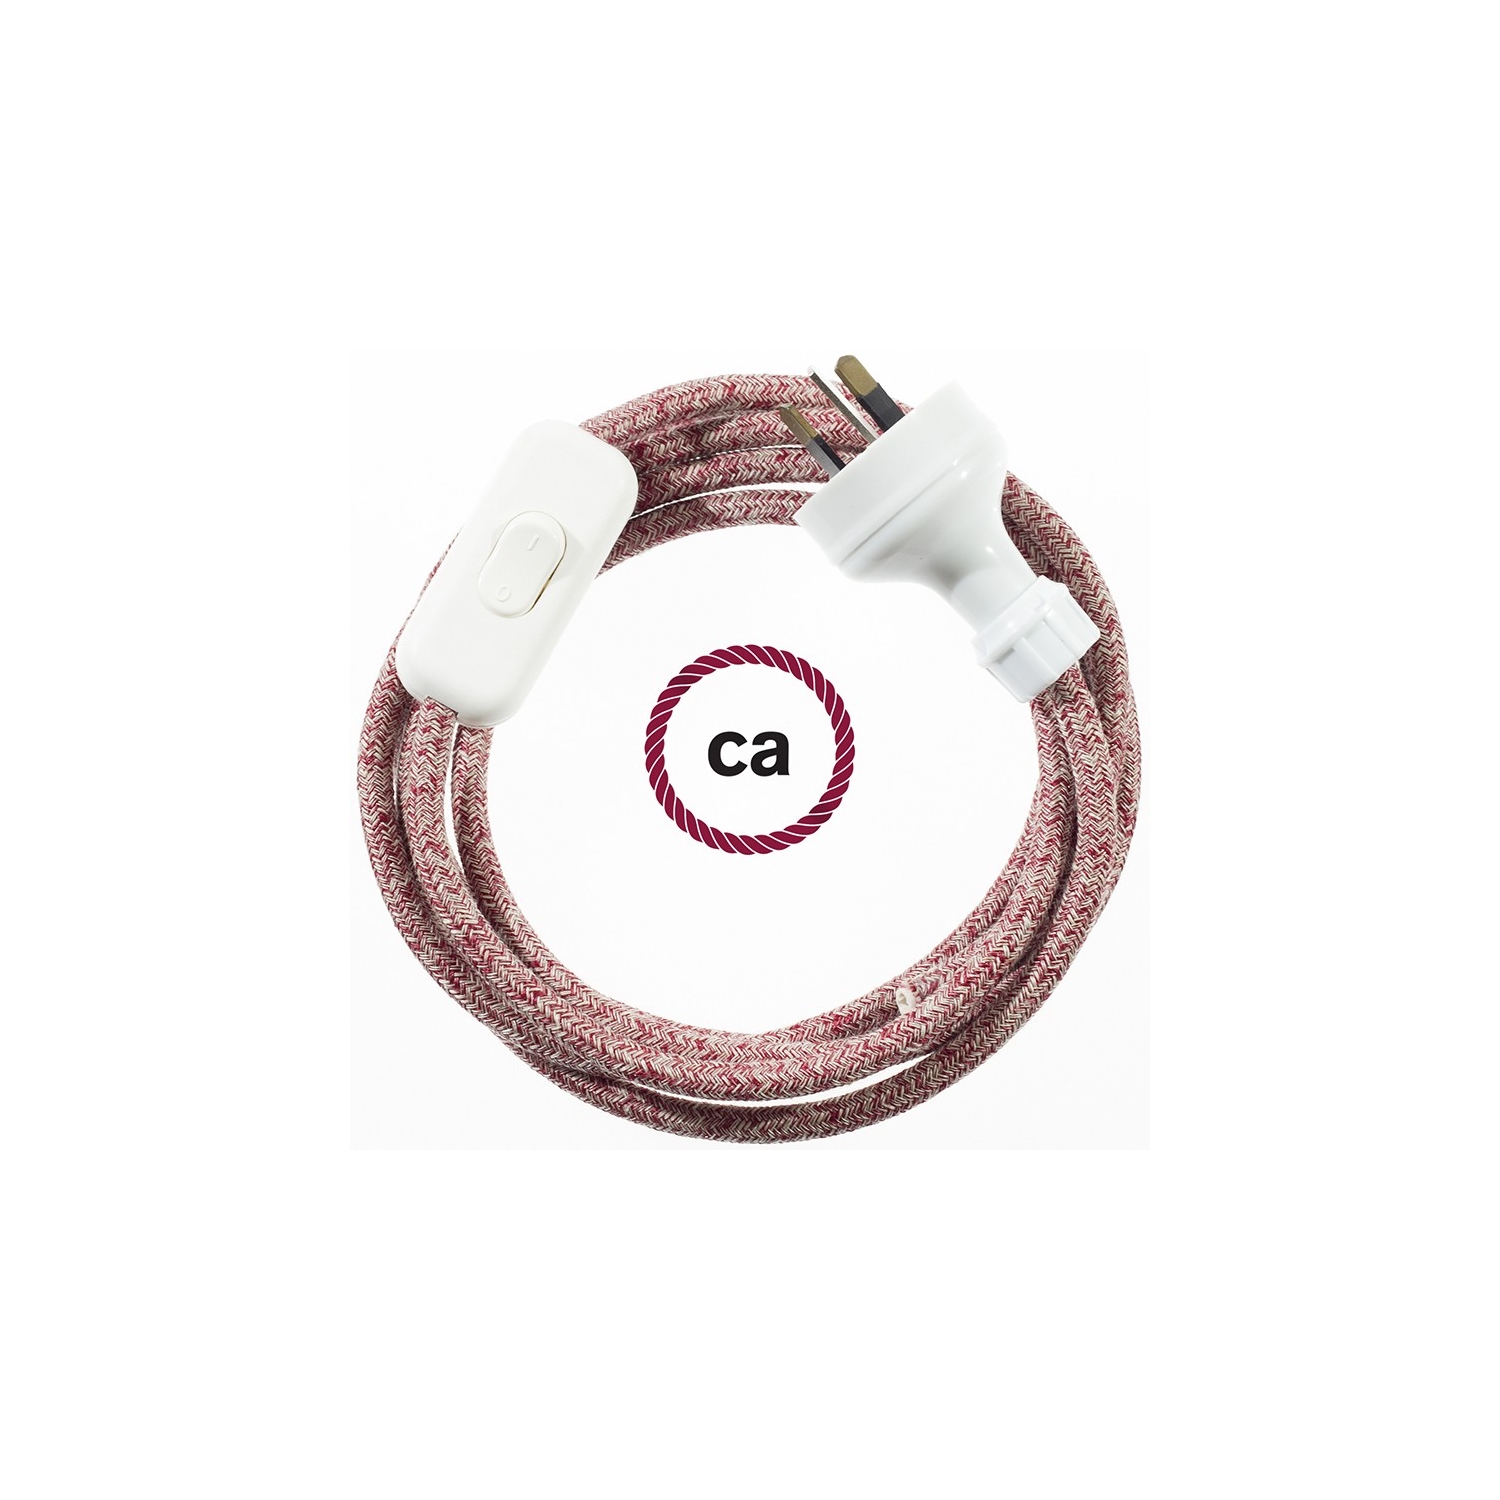 Wiring Red Glittering Natural Linen textile cable RS83 - 1.80 mt